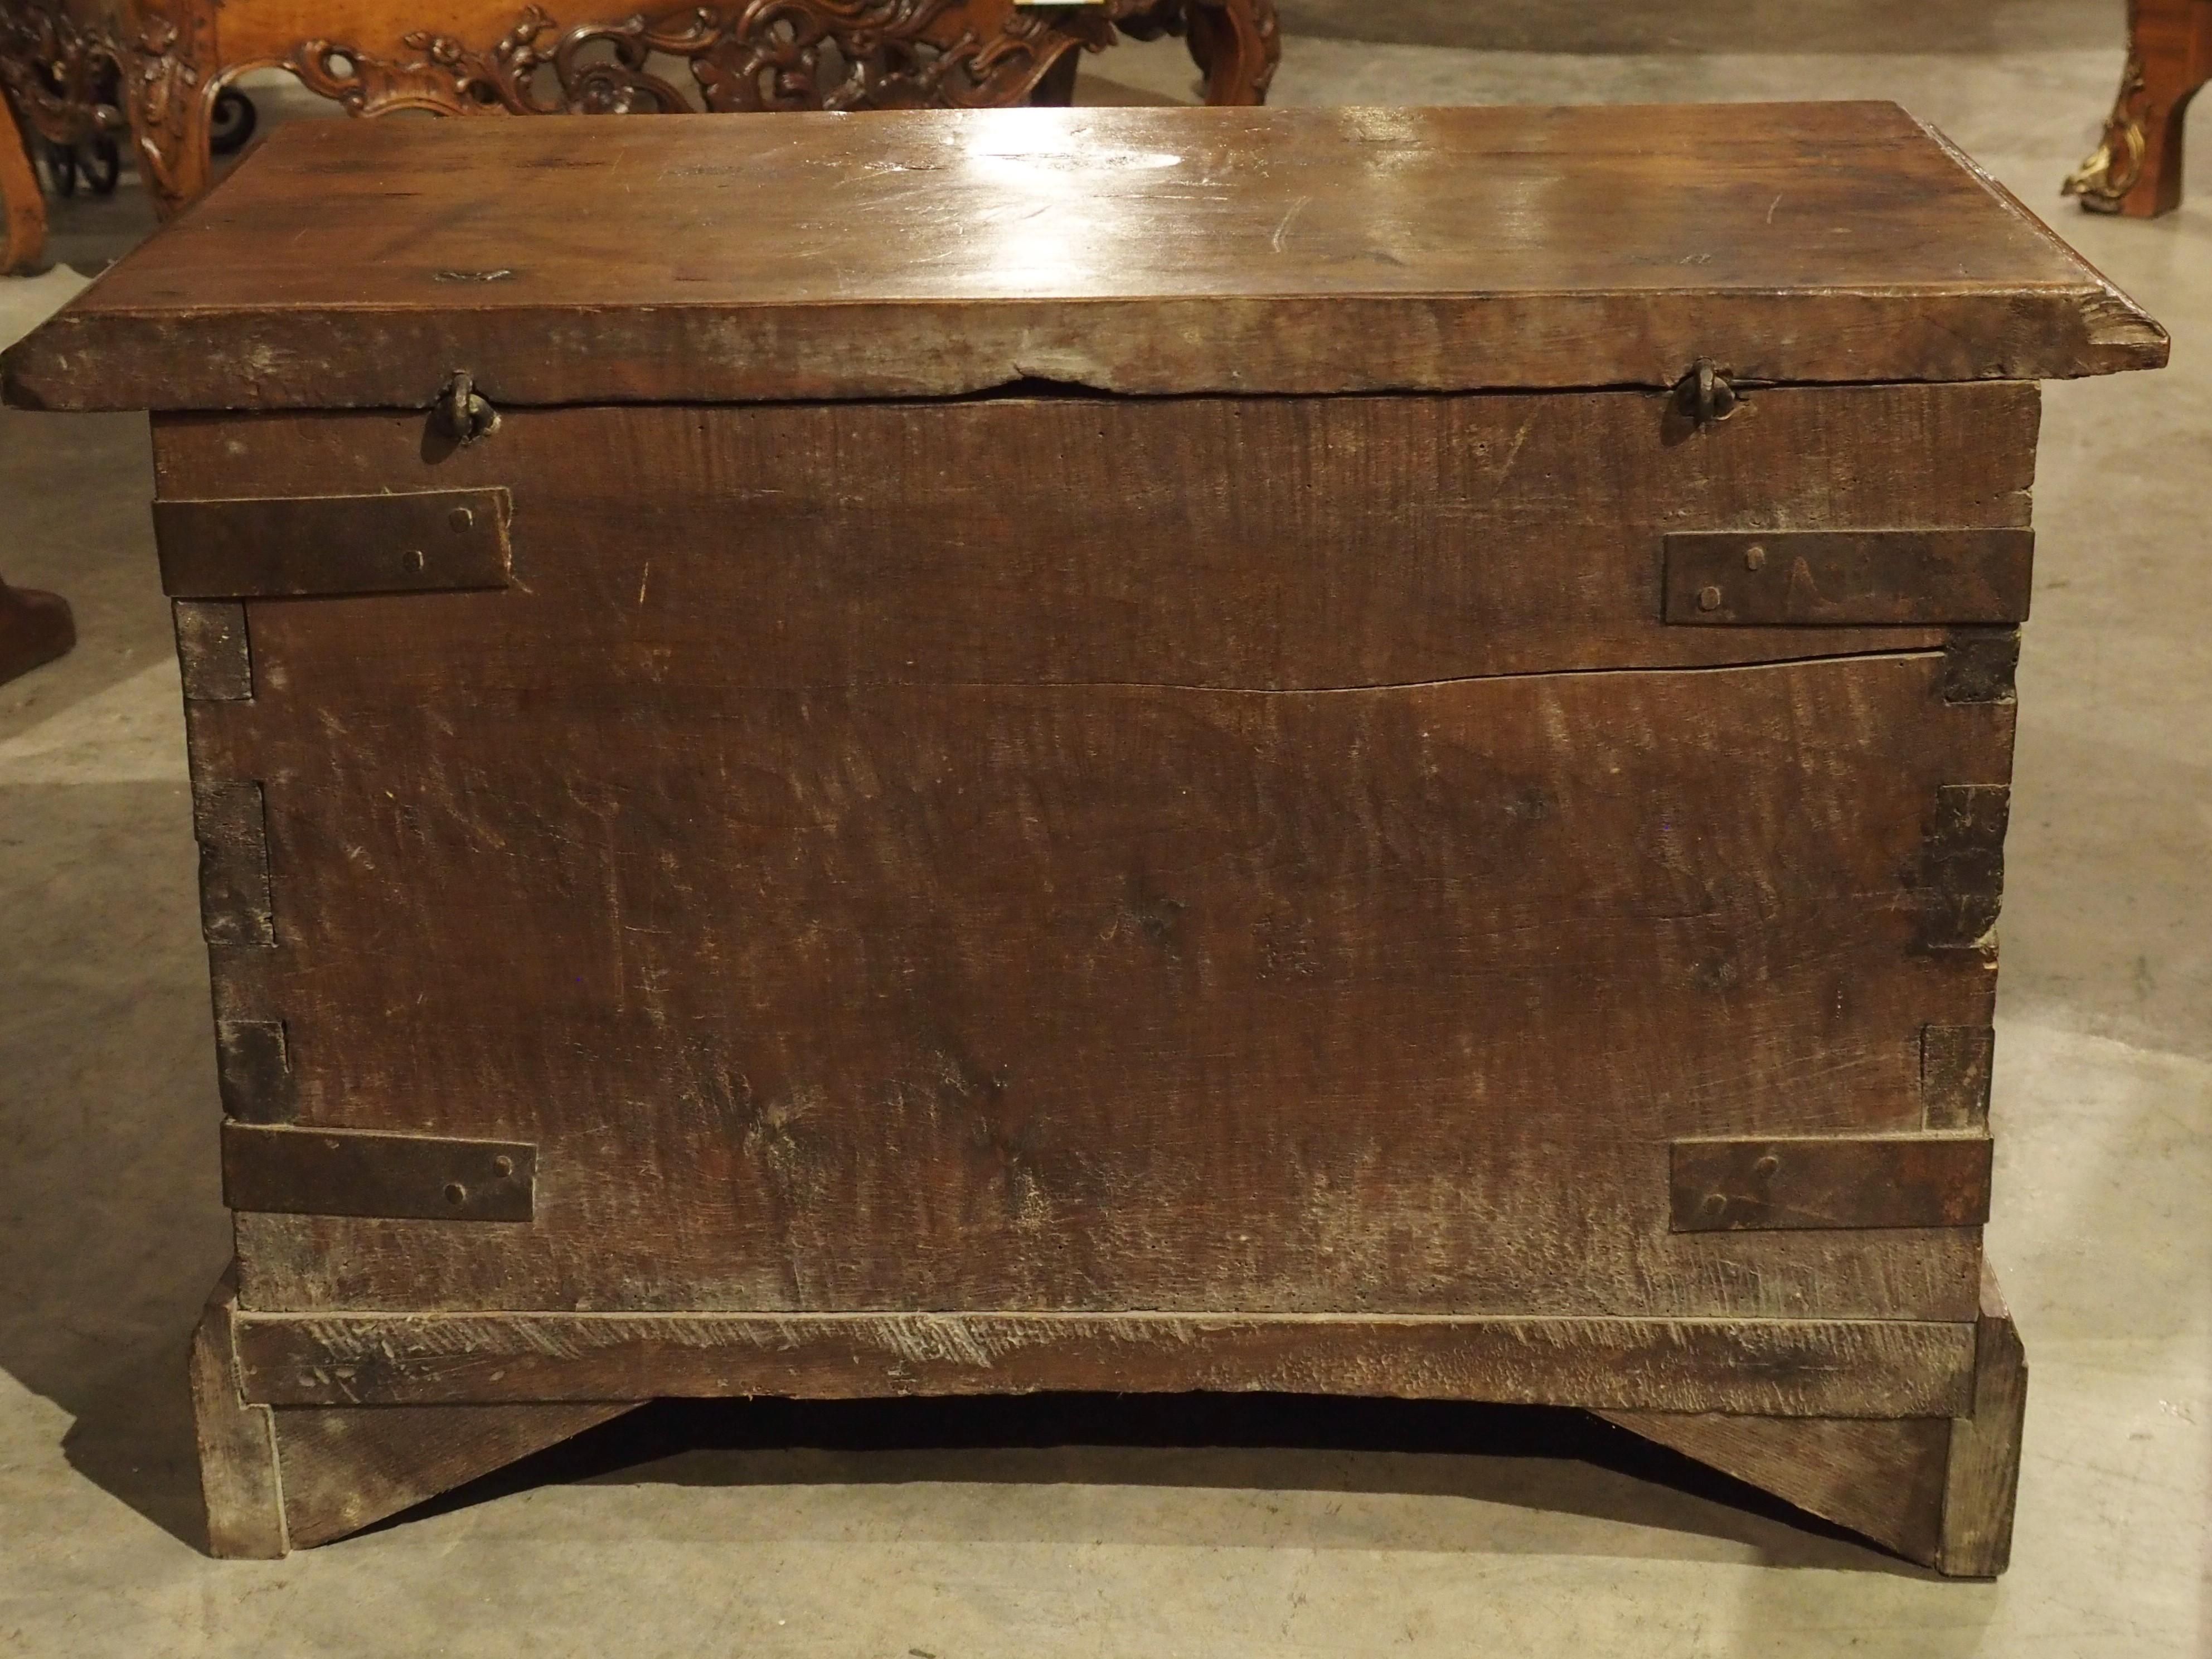 Made in France during the 1800’s, this oak trunk is of the Haute Epoque style. The Haute Epoque (or “High Age”) represents the second division of Medieval history, following the Early Middle Ages and preceding the Late Middle Ages. Items from the